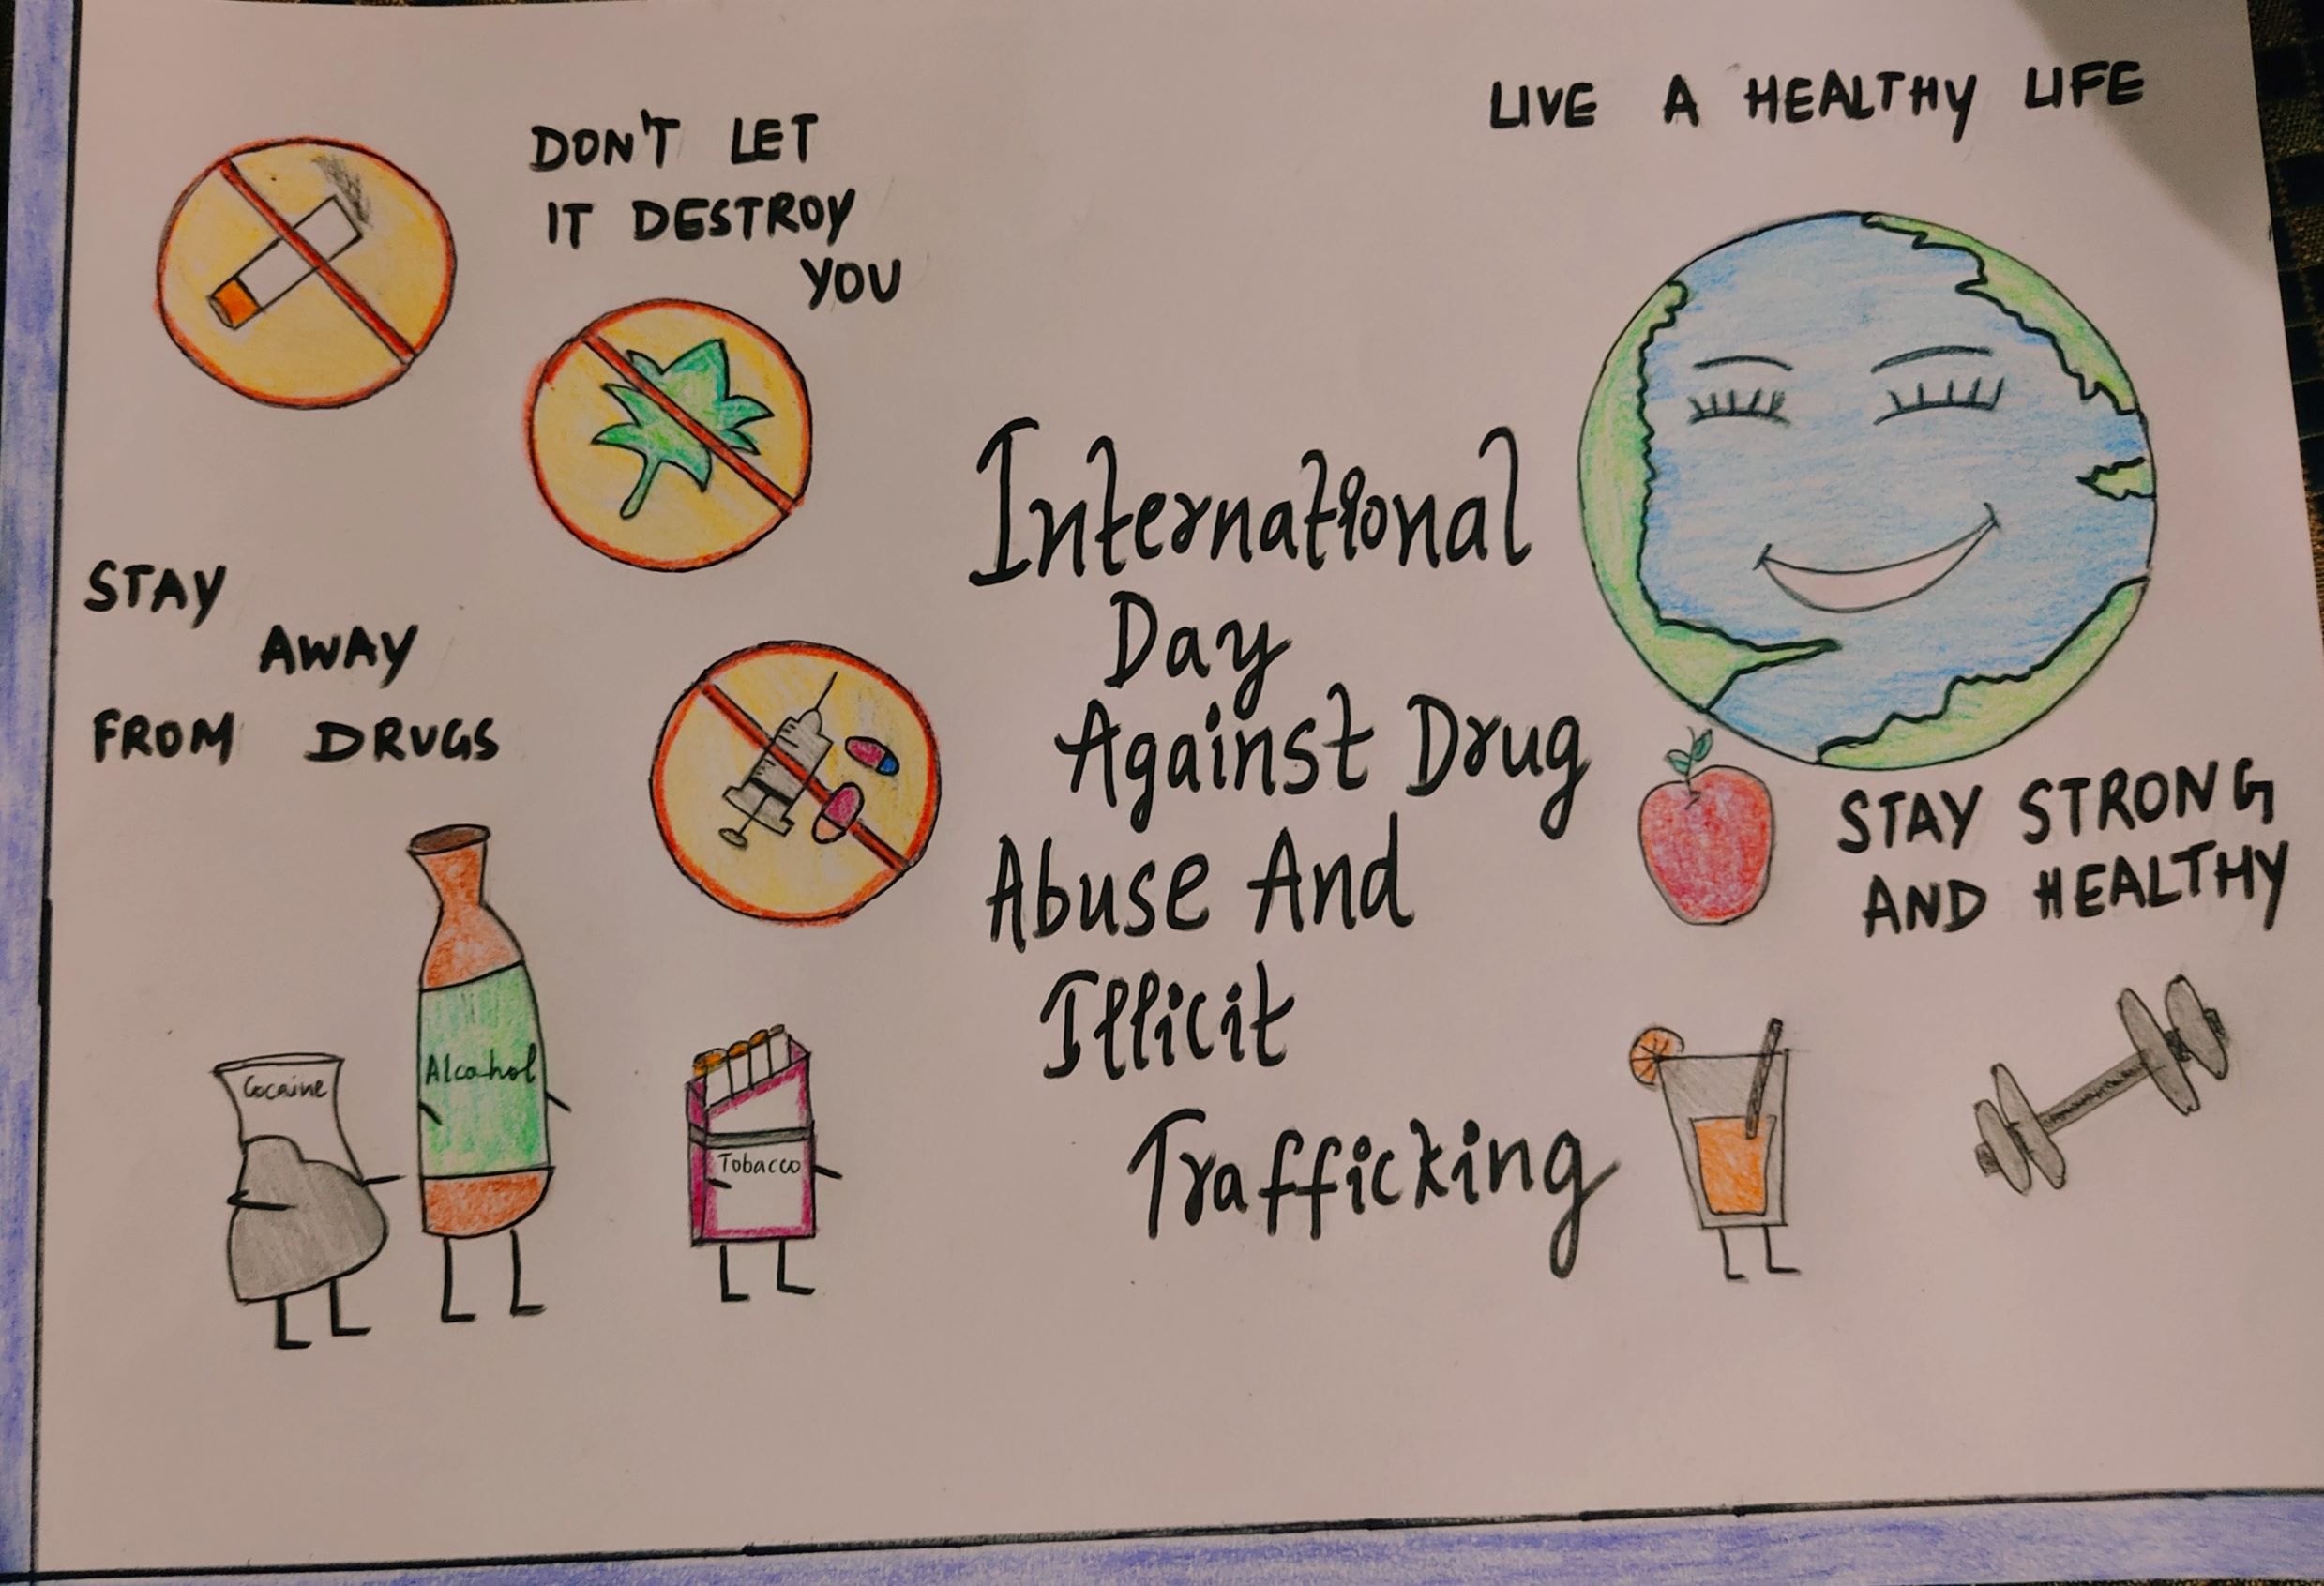 International Day Against Drugs Photos and Images & Pictures | Shutterstock